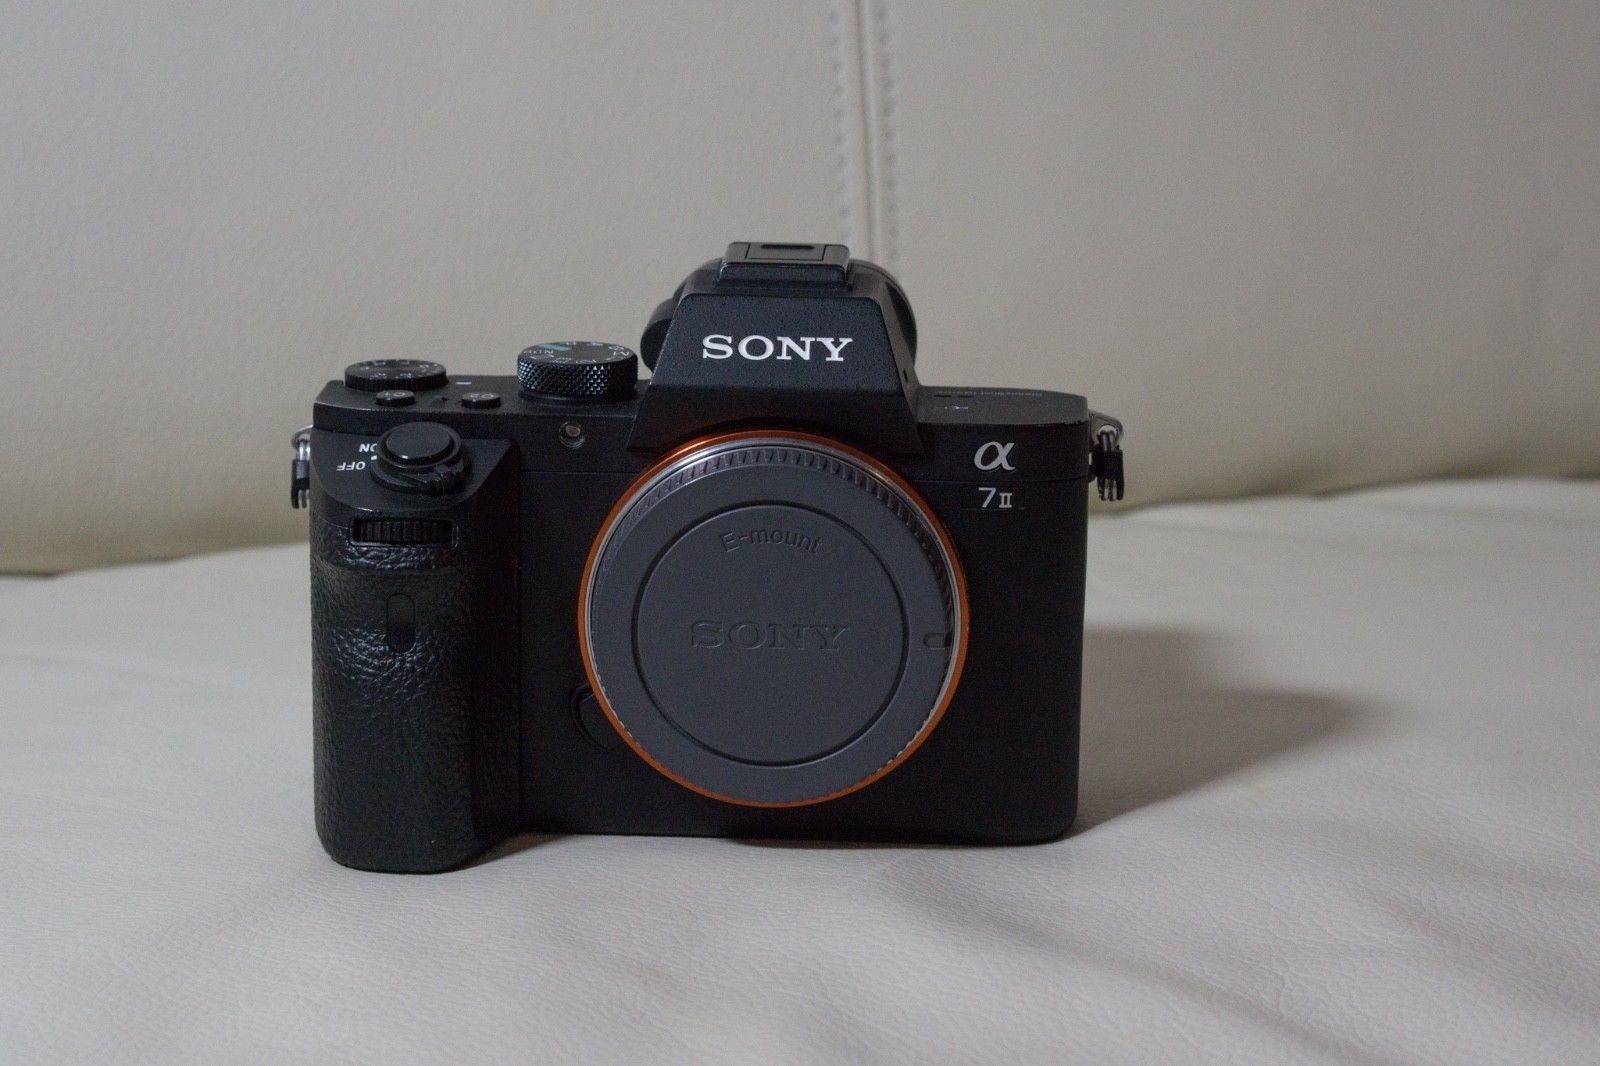 Sony Alpha ILCE-7M2 24.3 MP - A7 II - Body only